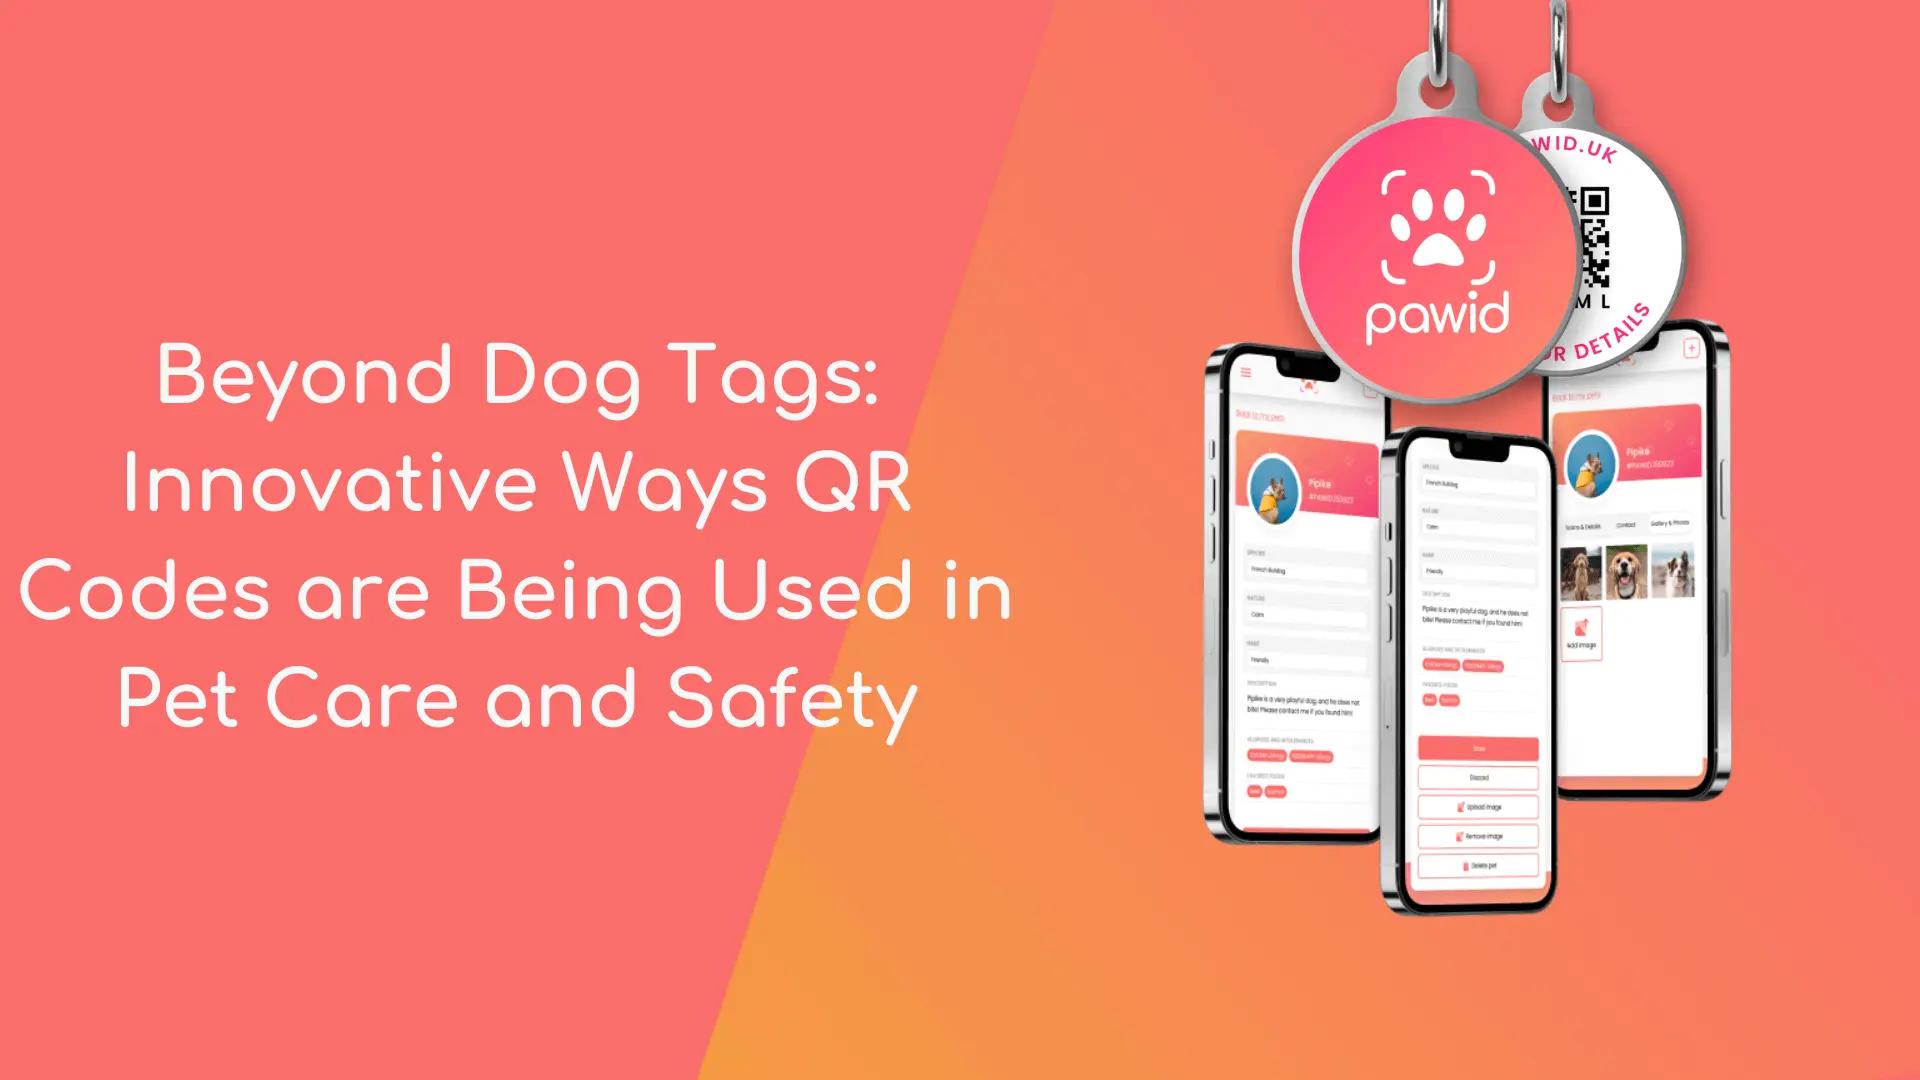 Innovative Ways QR Codes are Being Used in Pet Care and Safety